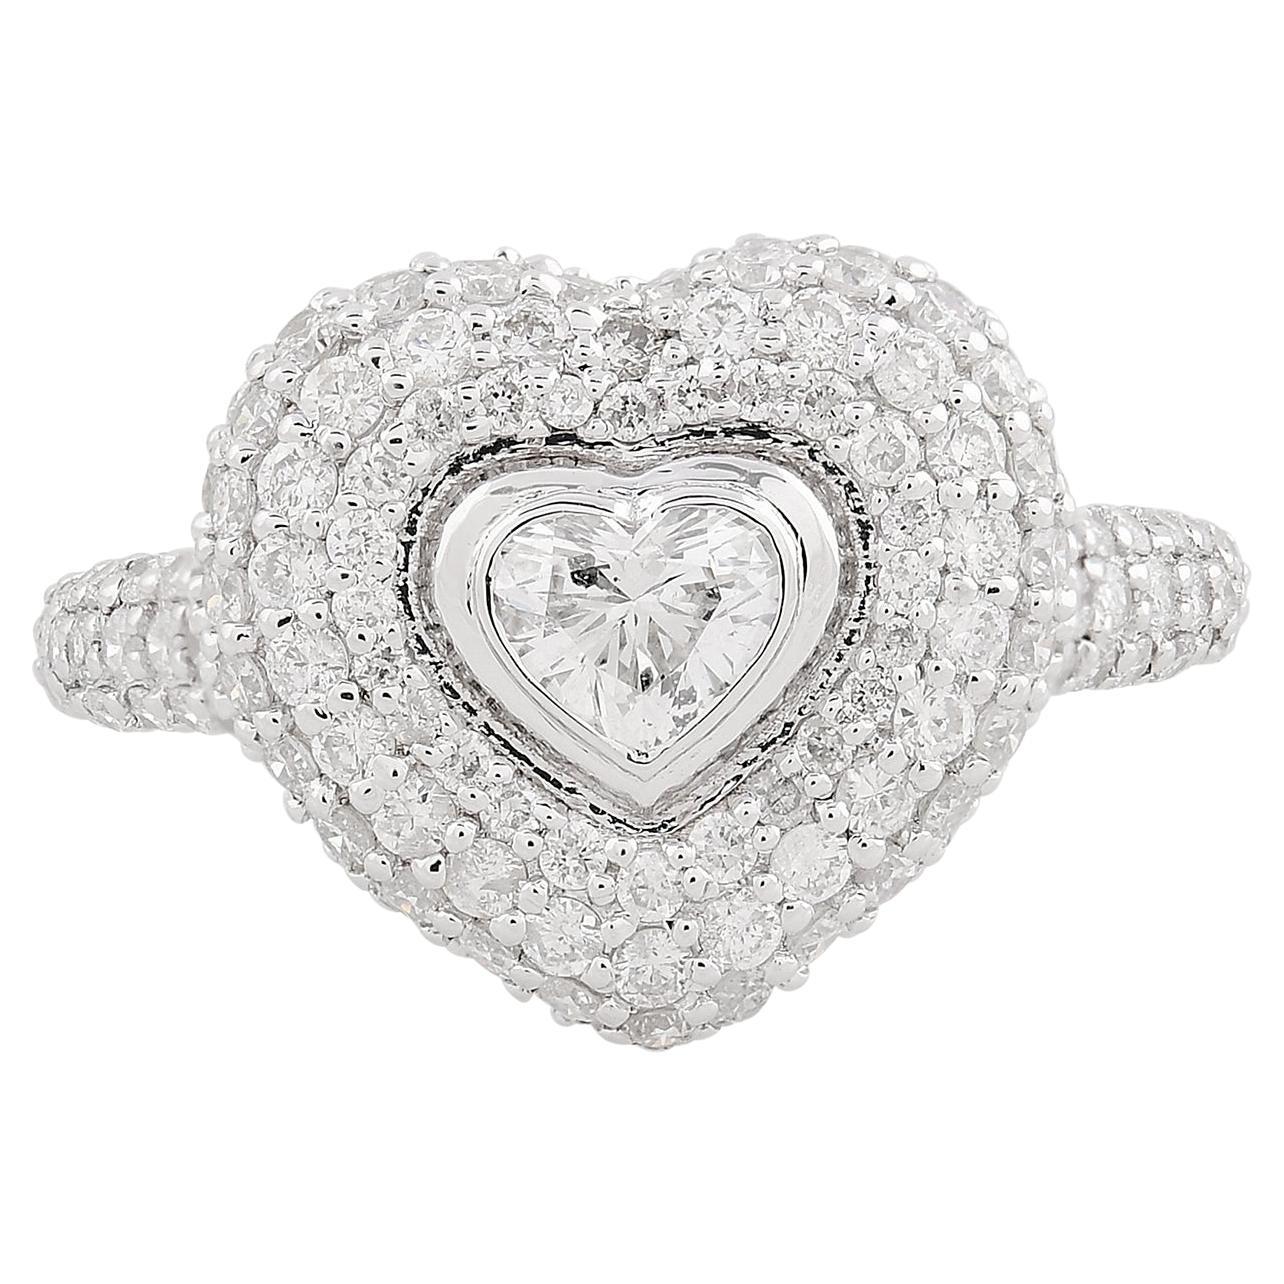 1.69 Carat SI Clarity HI Color Heart Diamond Ring 18 Karat White Gold Jewelry For Sale